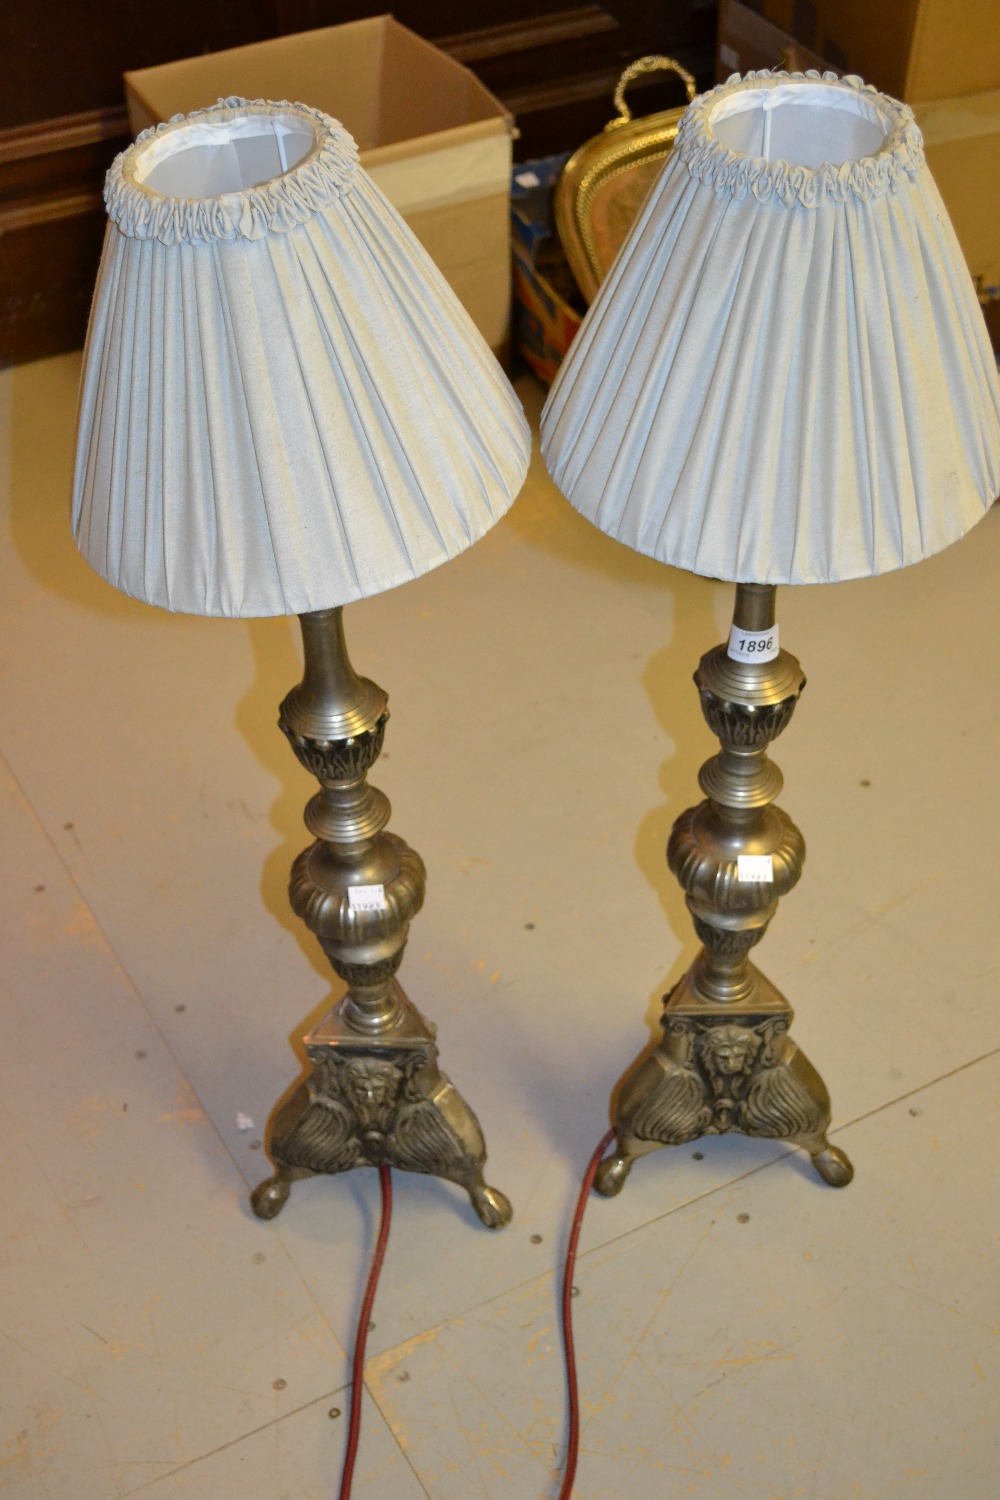 Pair of 20th Century silvered metal table lamps in antique Dutch style - Image 2 of 2